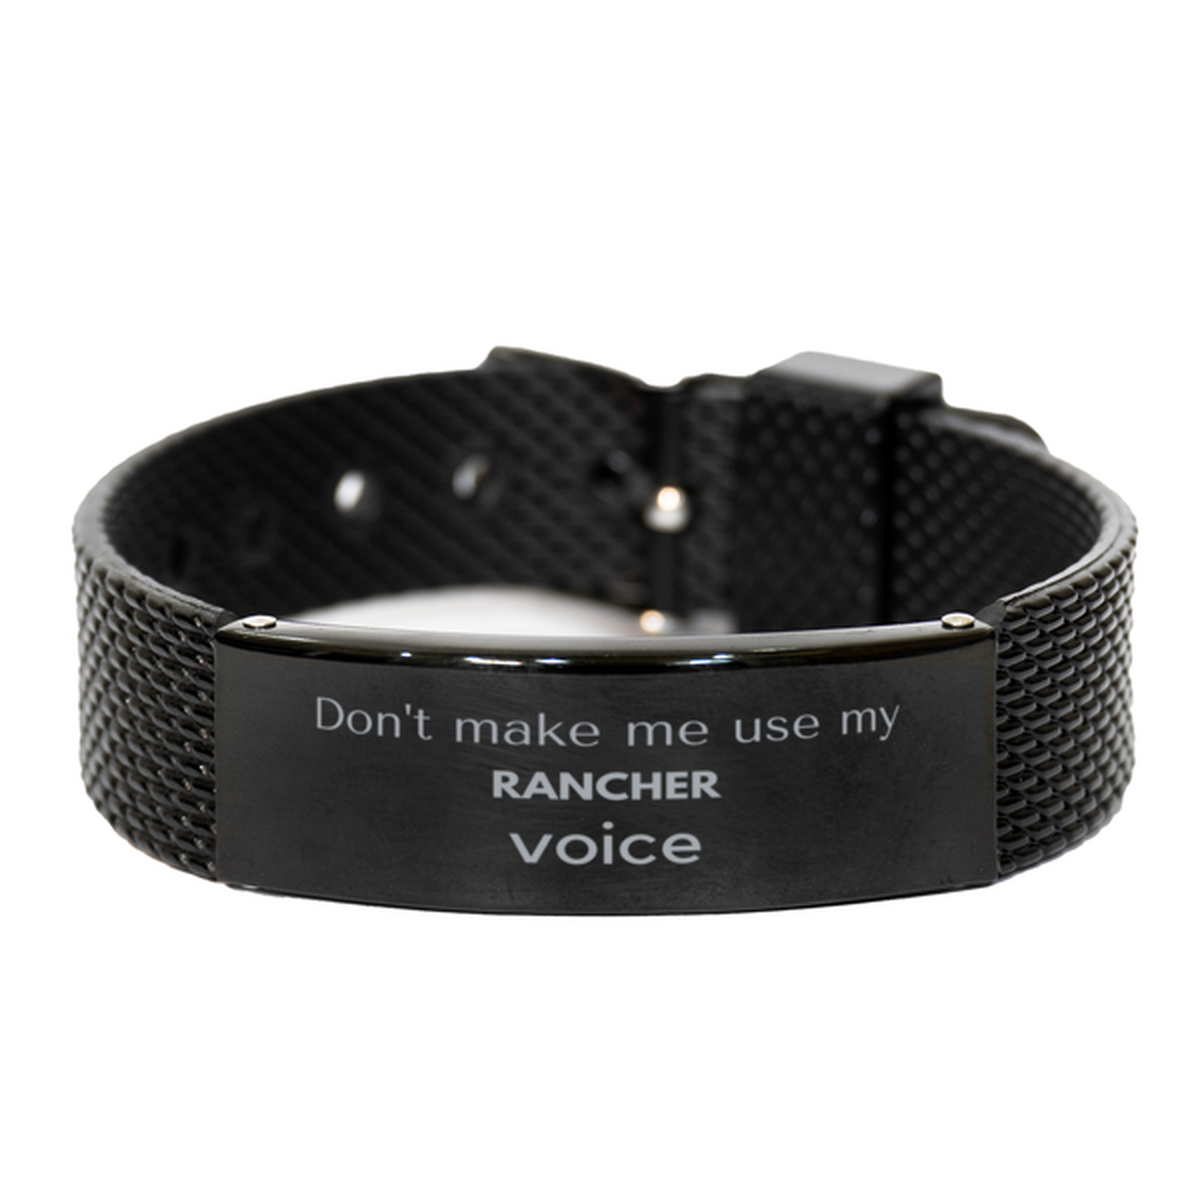 Don't make me use my Rancher voice, Sarcasm Rancher Gifts, Christmas Rancher Black Shark Mesh Bracelet Birthday Unique Gifts For Rancher Coworkers, Men, Women, Colleague, Friends